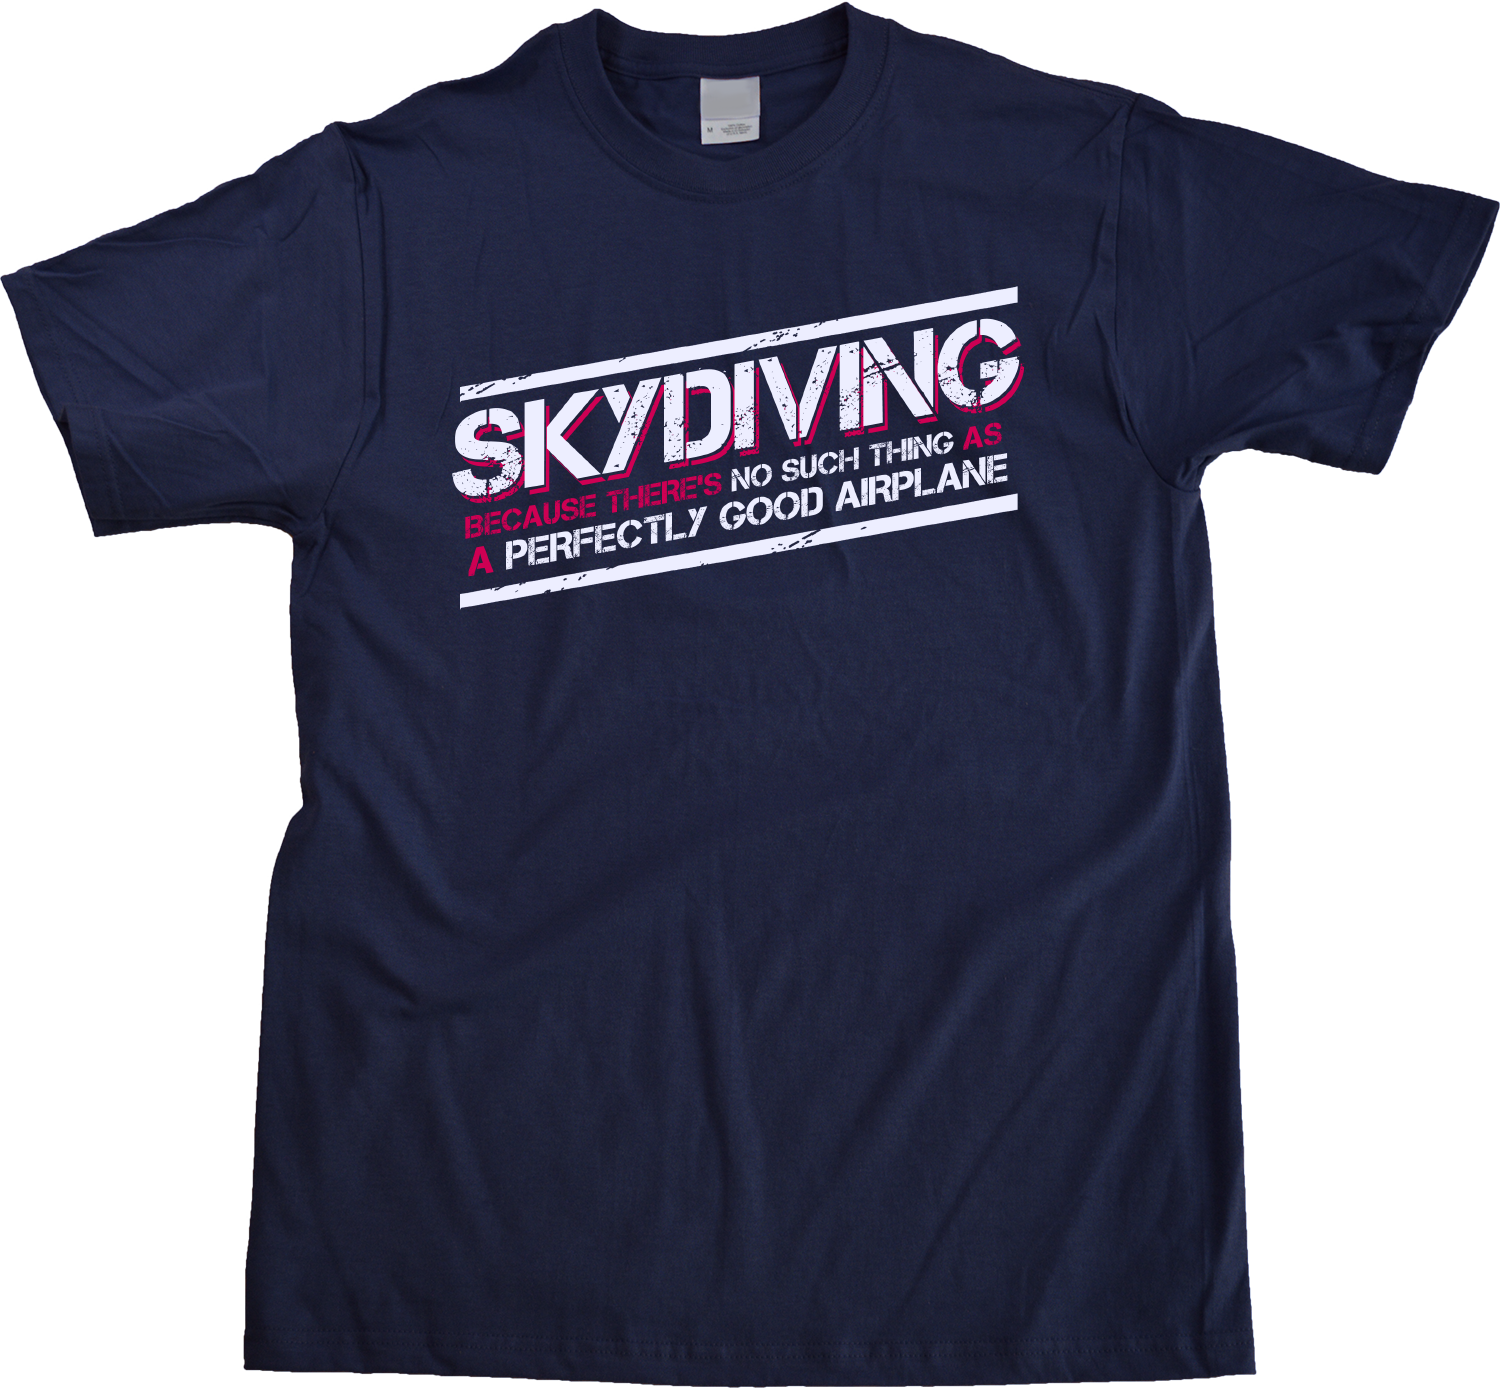 Unisex Navy Skydiving: No Such Thing As Perfectly Good Airplane - Daredevil T-shirt